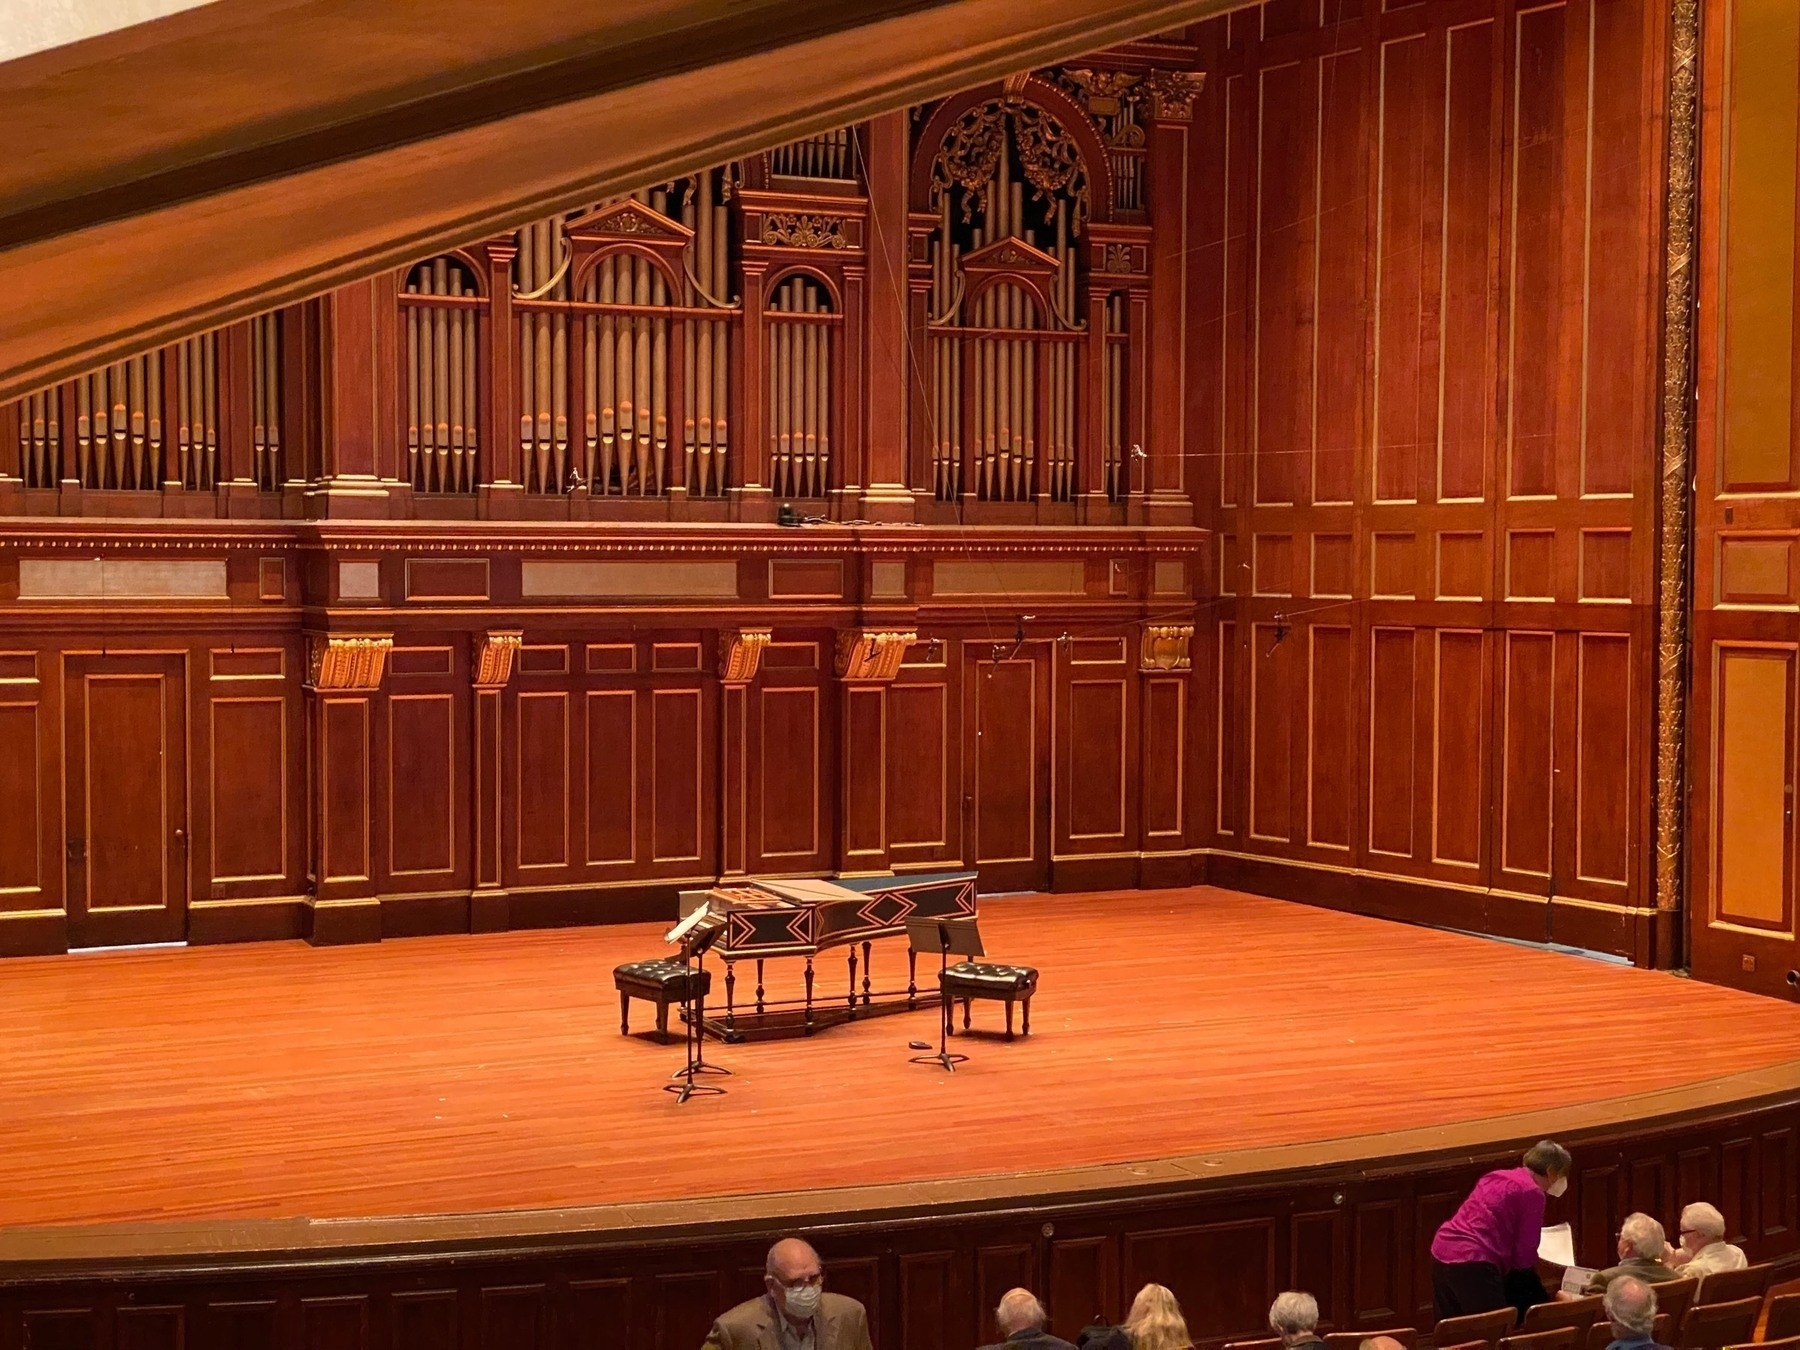 Bare wooden stage with a harpsichord and music stands in the center, with wood panels and a large organ built into the back wall.